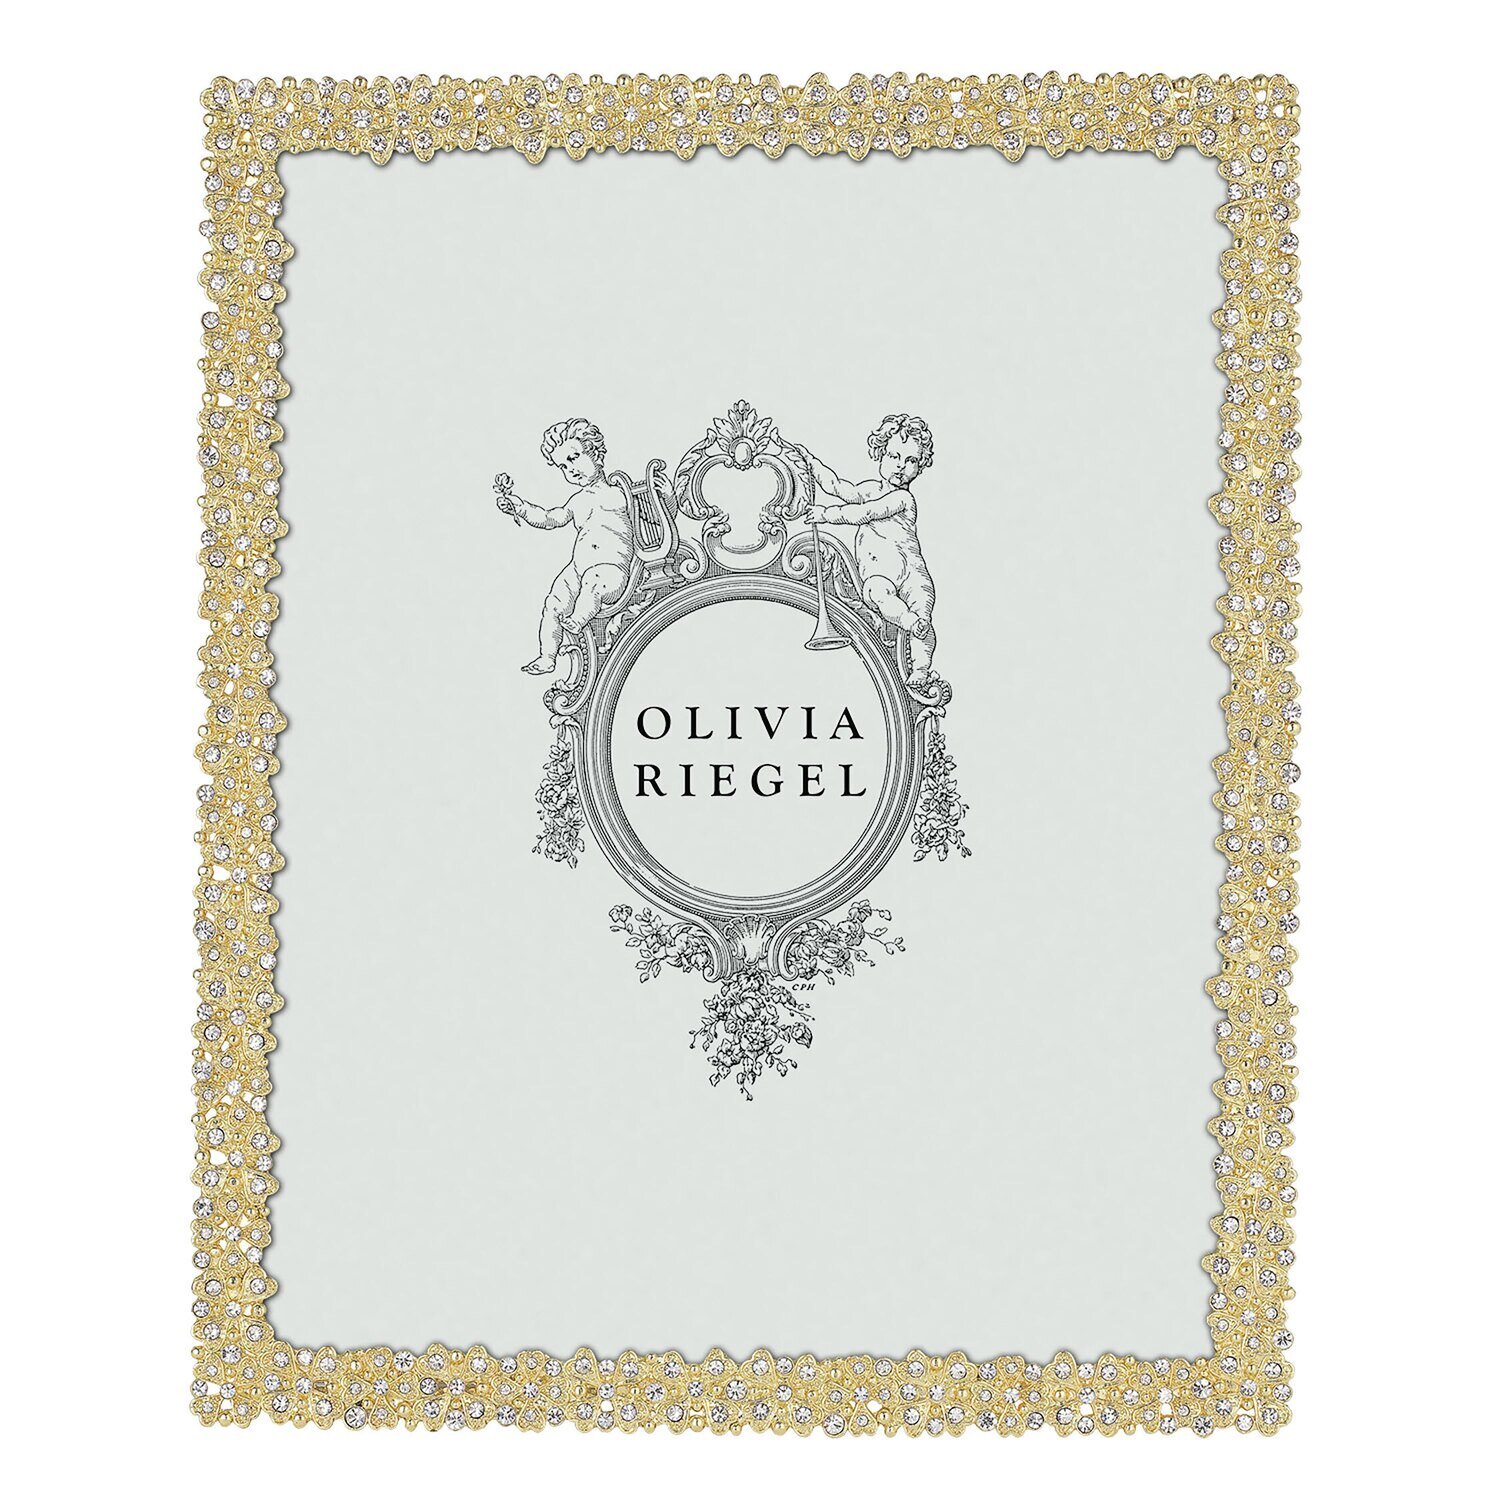 Olivia Riegel Gold Evie 8 x 10 Inch Picture Frame RT4367